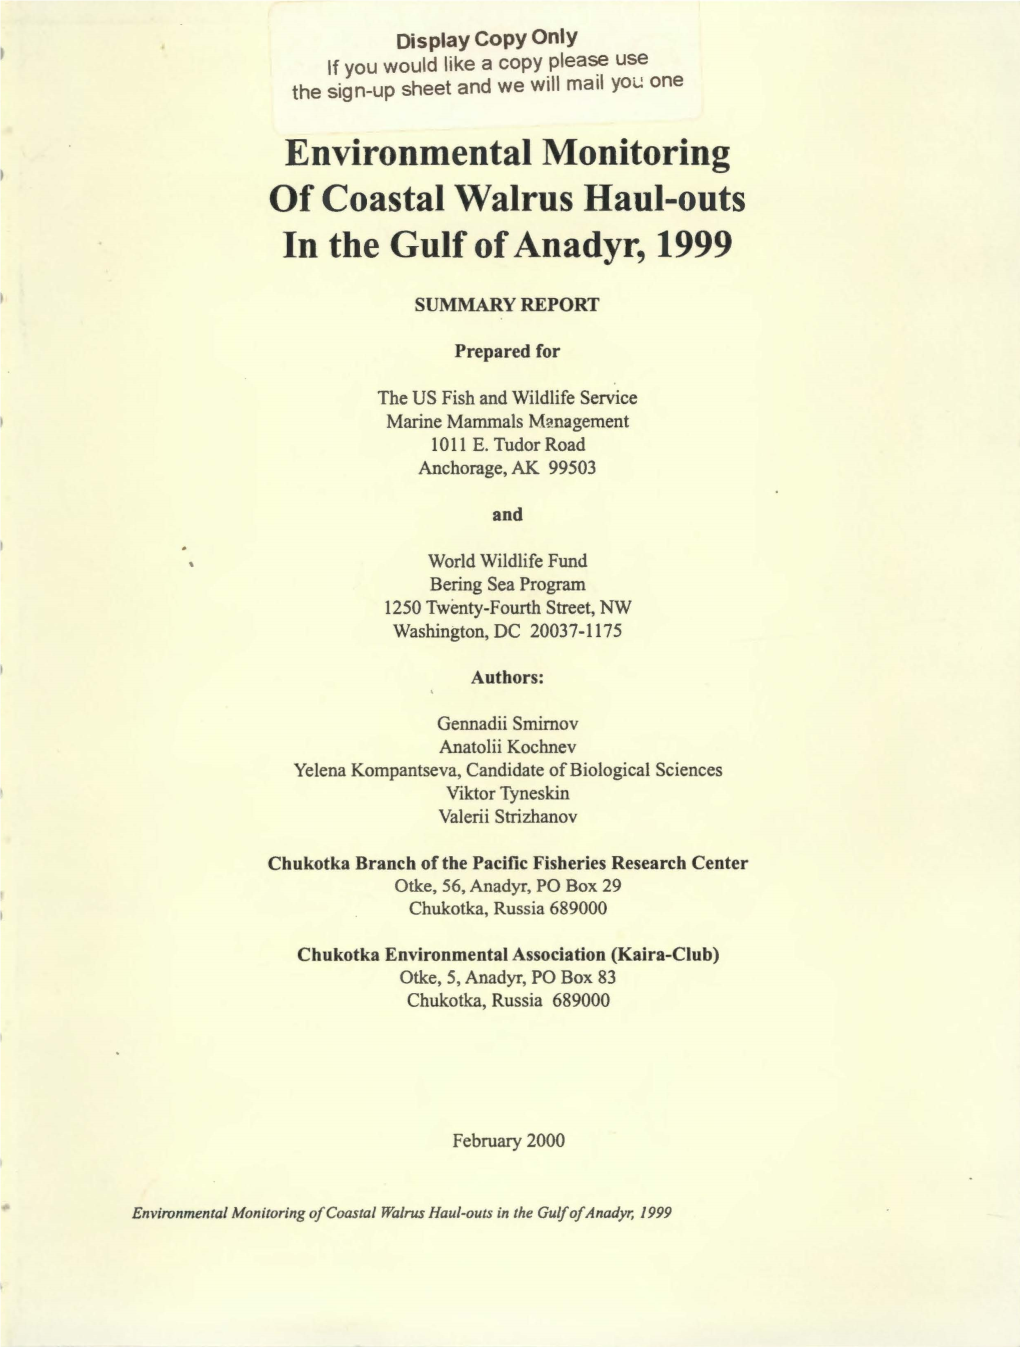 Environmental Monitoring of Coastal Walrus Haul-Outs in the Gulf of Anadyr, 1999 • SUMMARY REPORT Prepared For